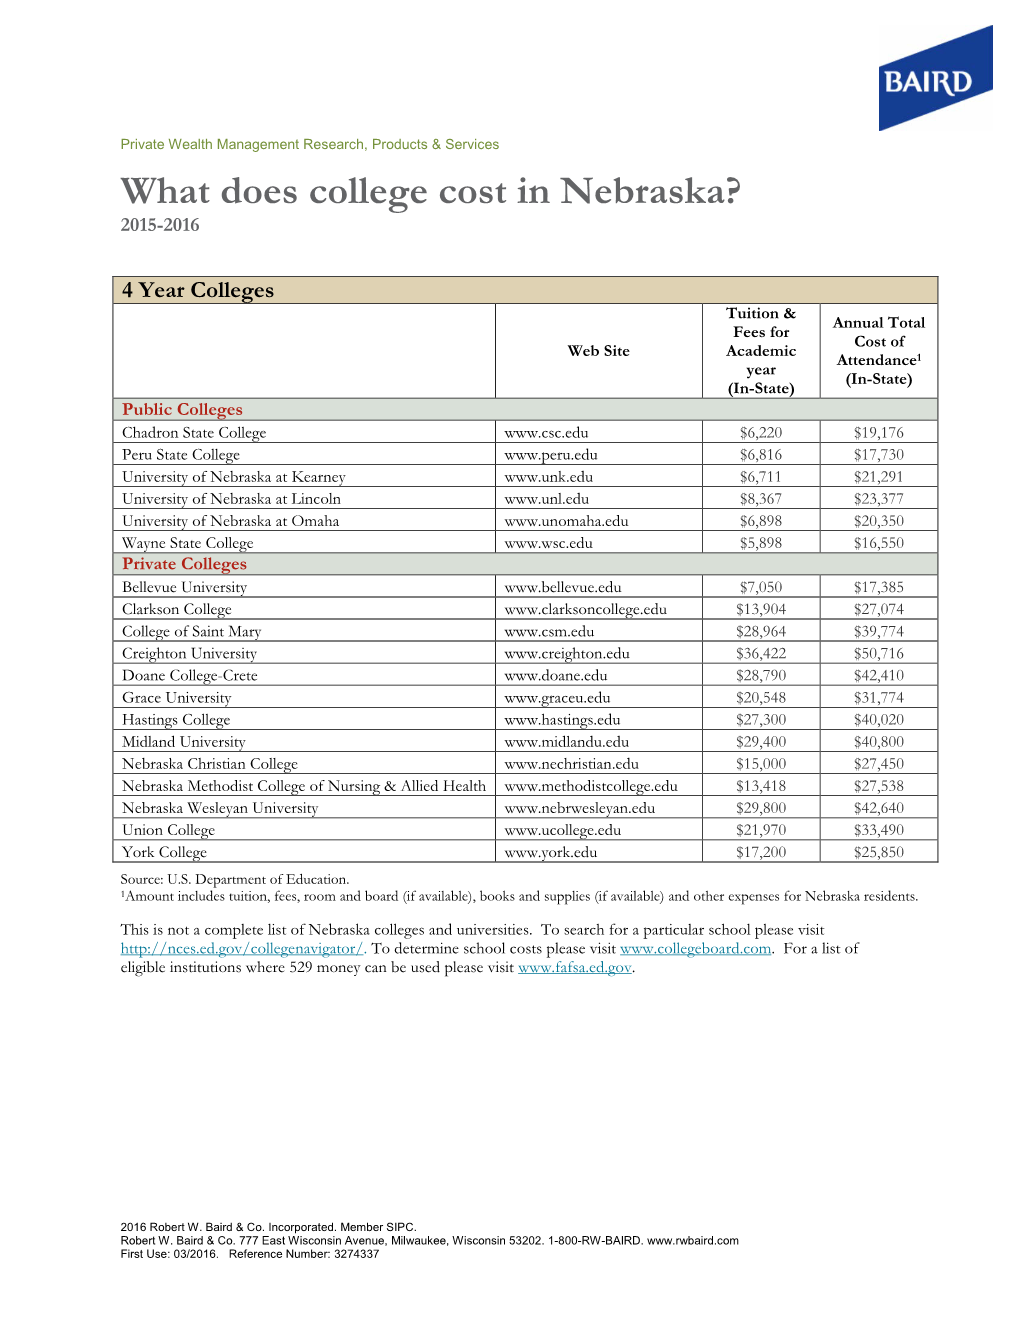 What Does College Cost in Nebraska? 2015-2016